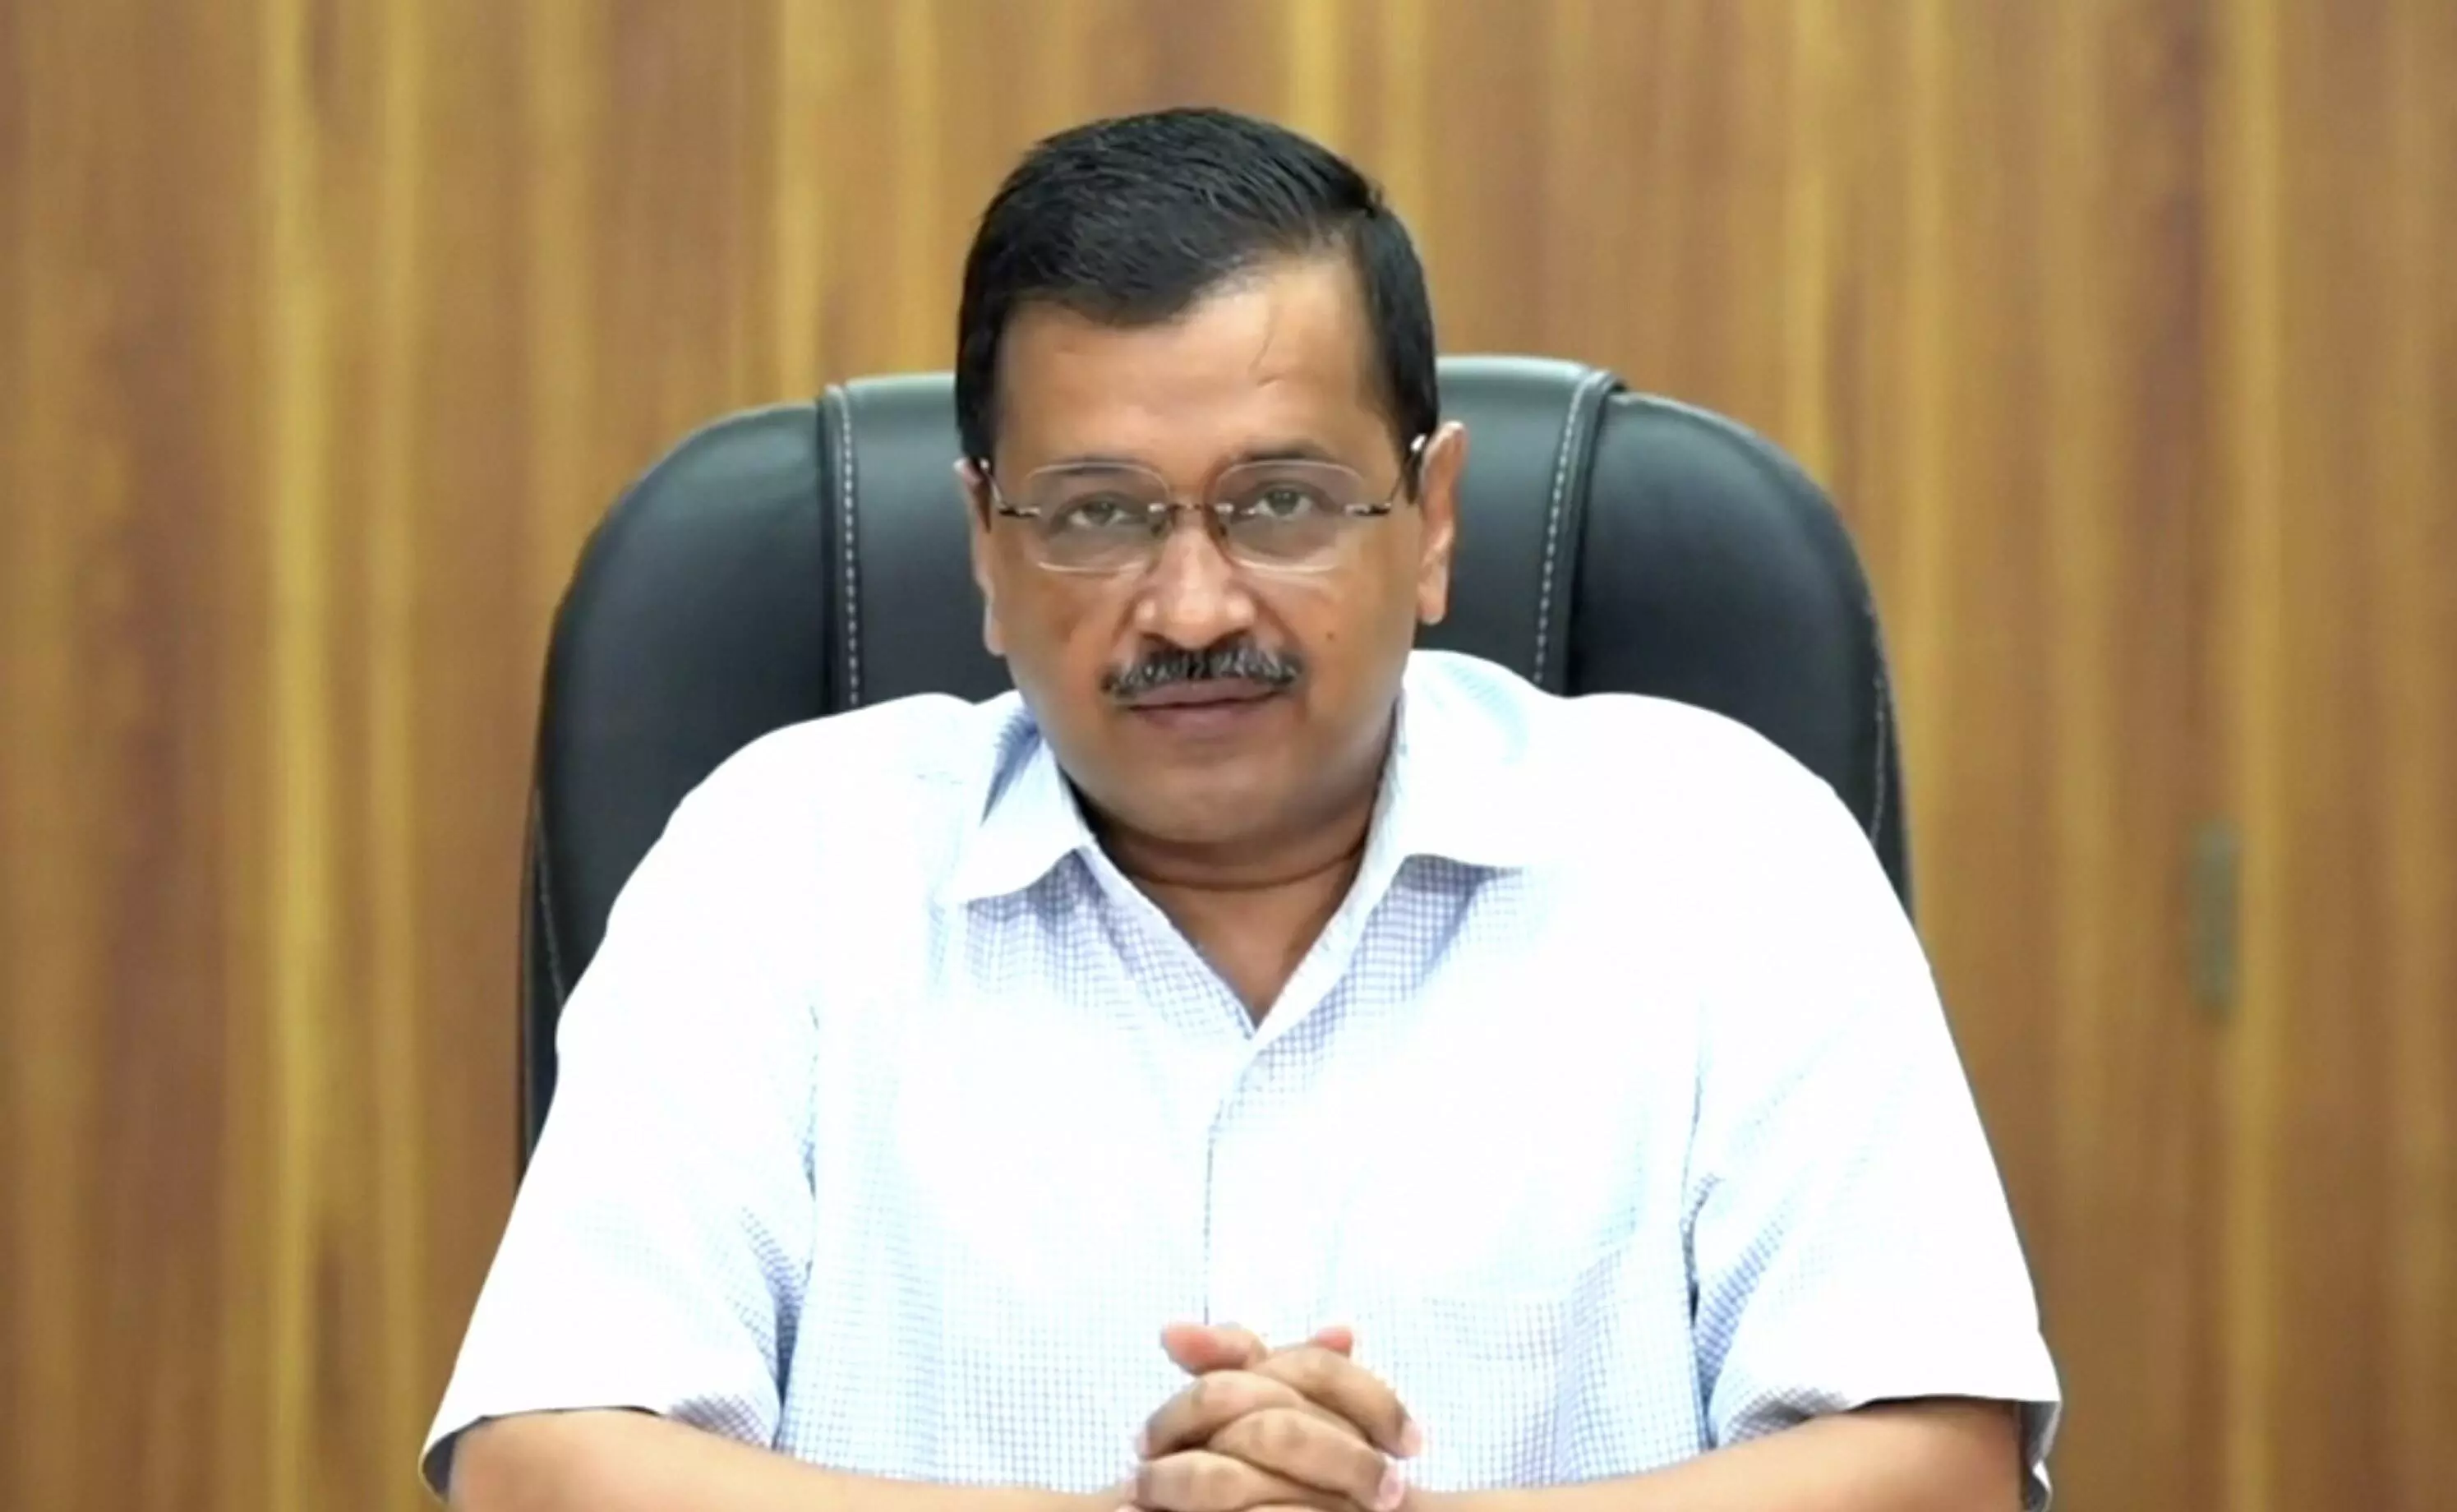 Kejriwal questioned for nearly nine hours at CBI headquarters